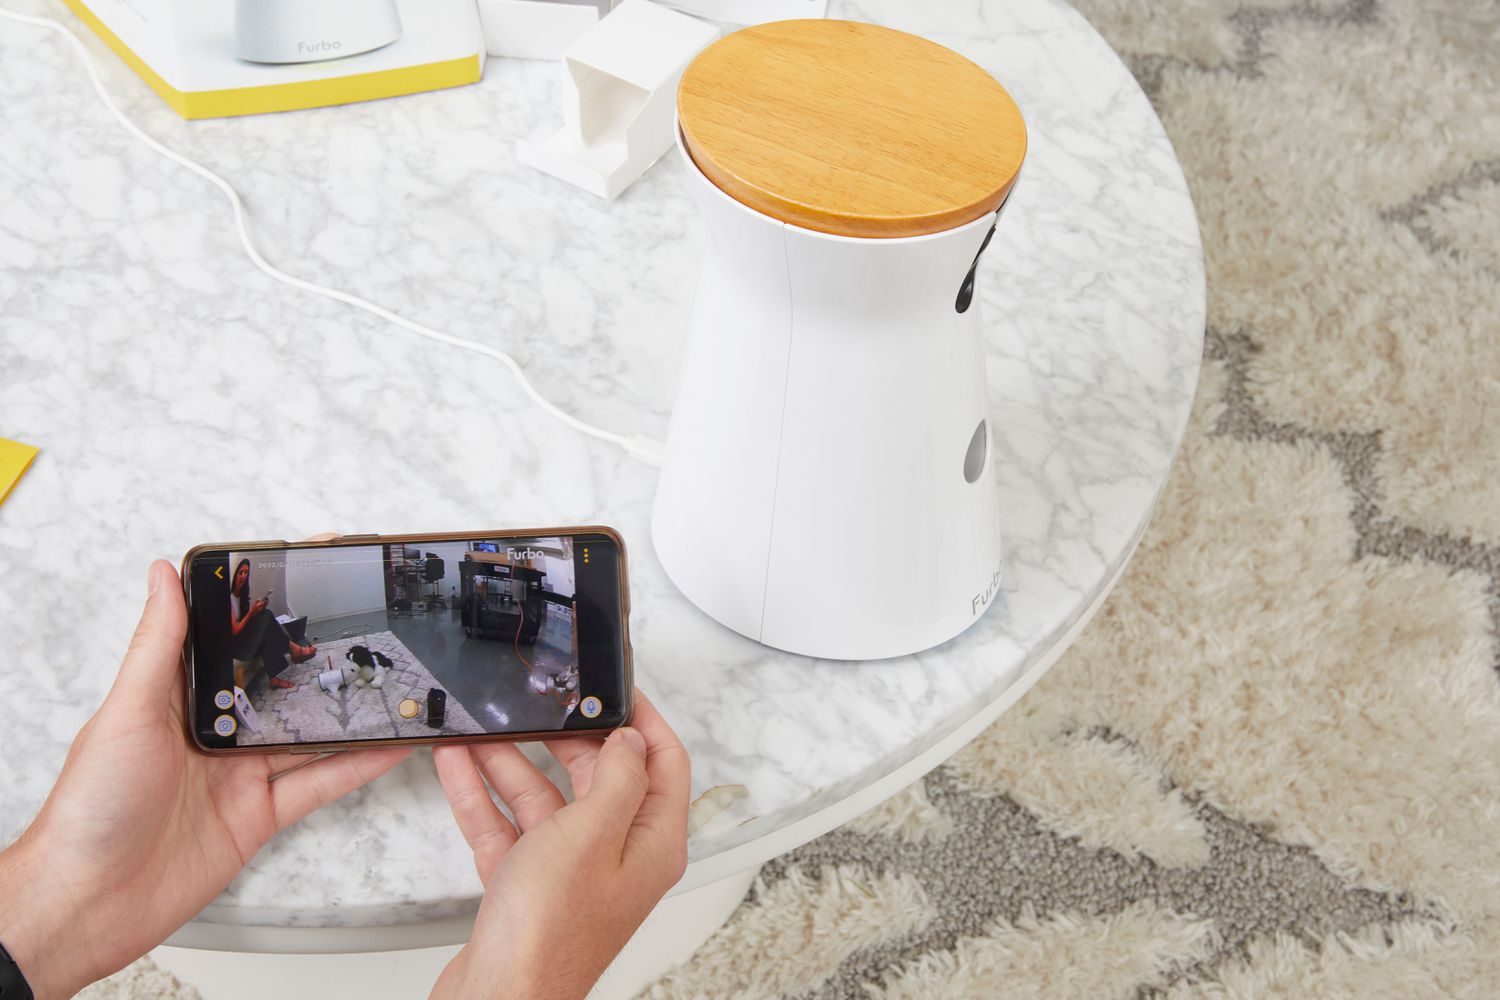 Hands holding smartphone while viewing video on app from Furbo 360° Dog Camera displayed on table